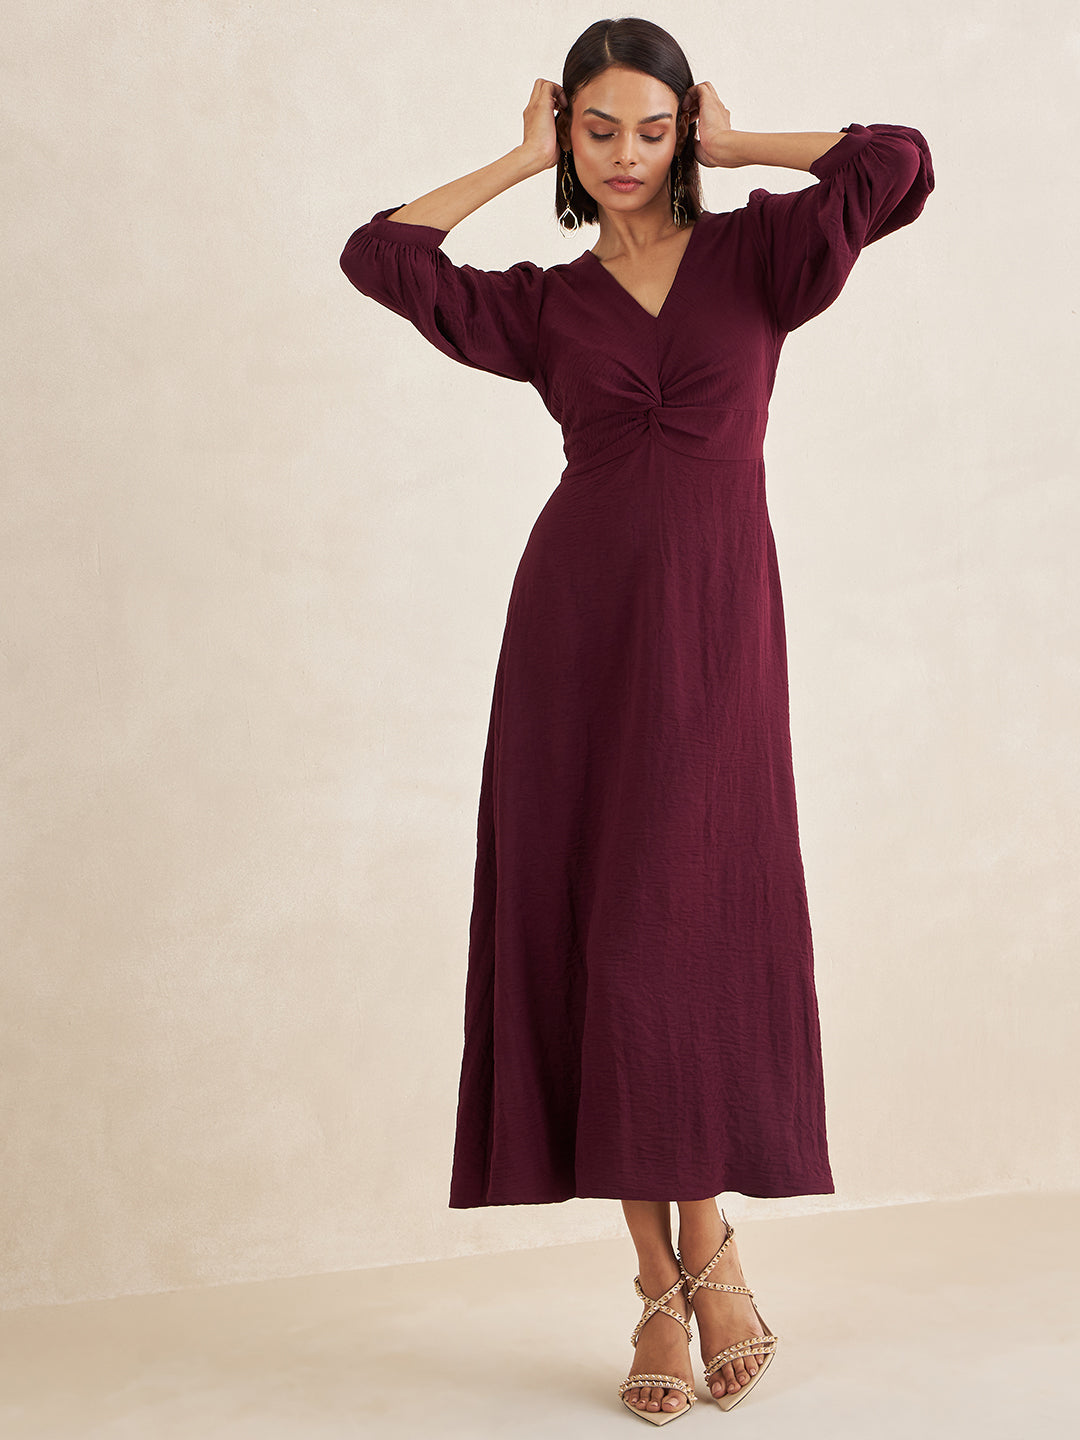 Twisted Wine Dress Maxi Front